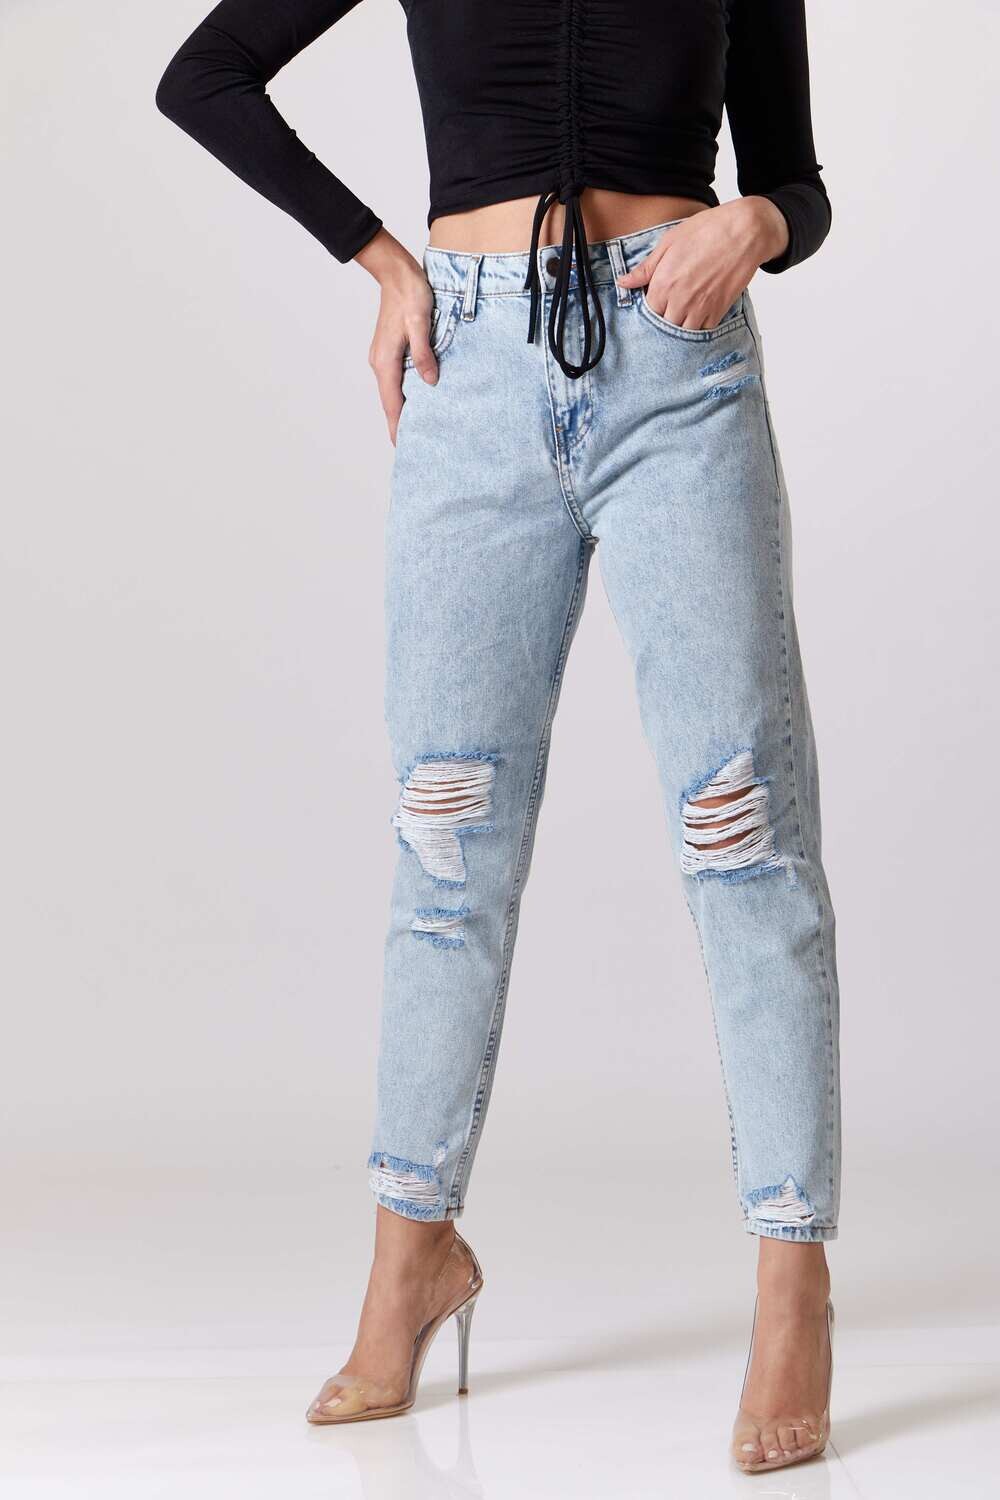 "Thrill" Distressed Jeans